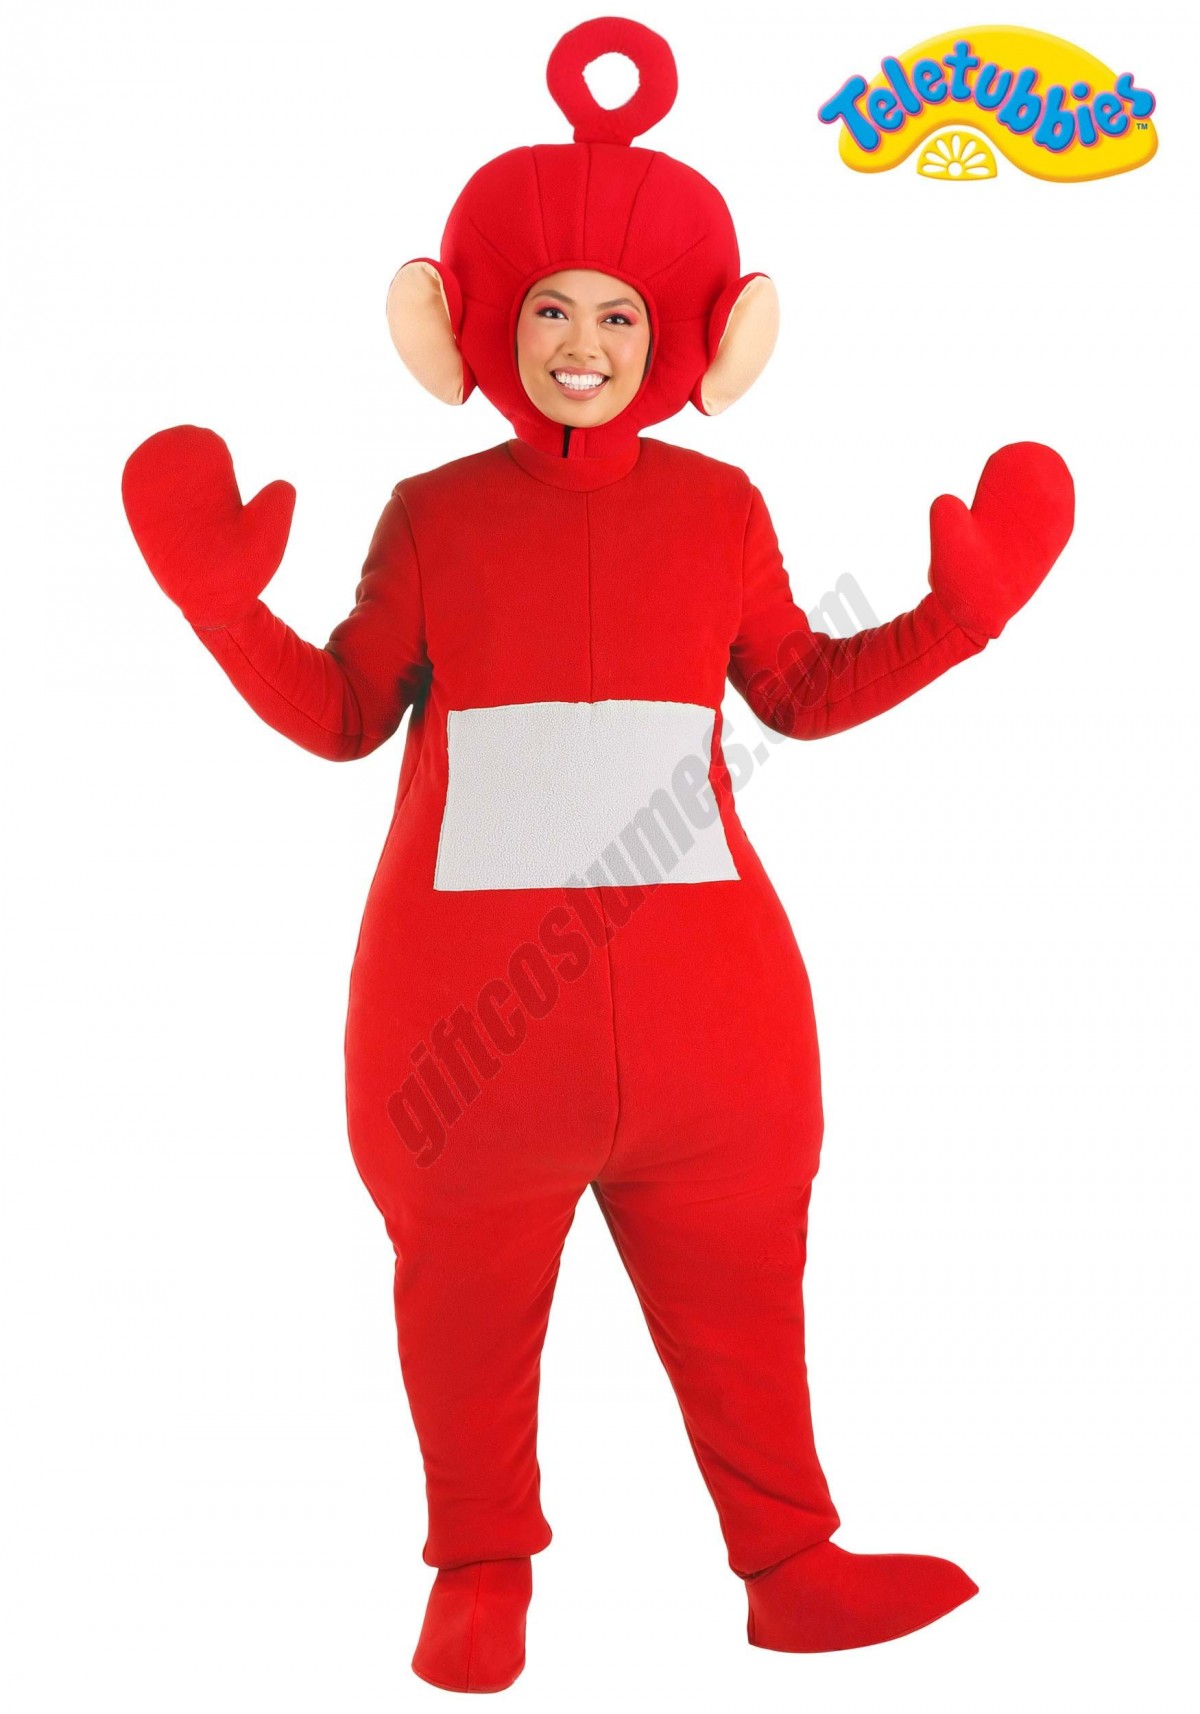 Po Teletubbies Costume for Adults Promotions - -0